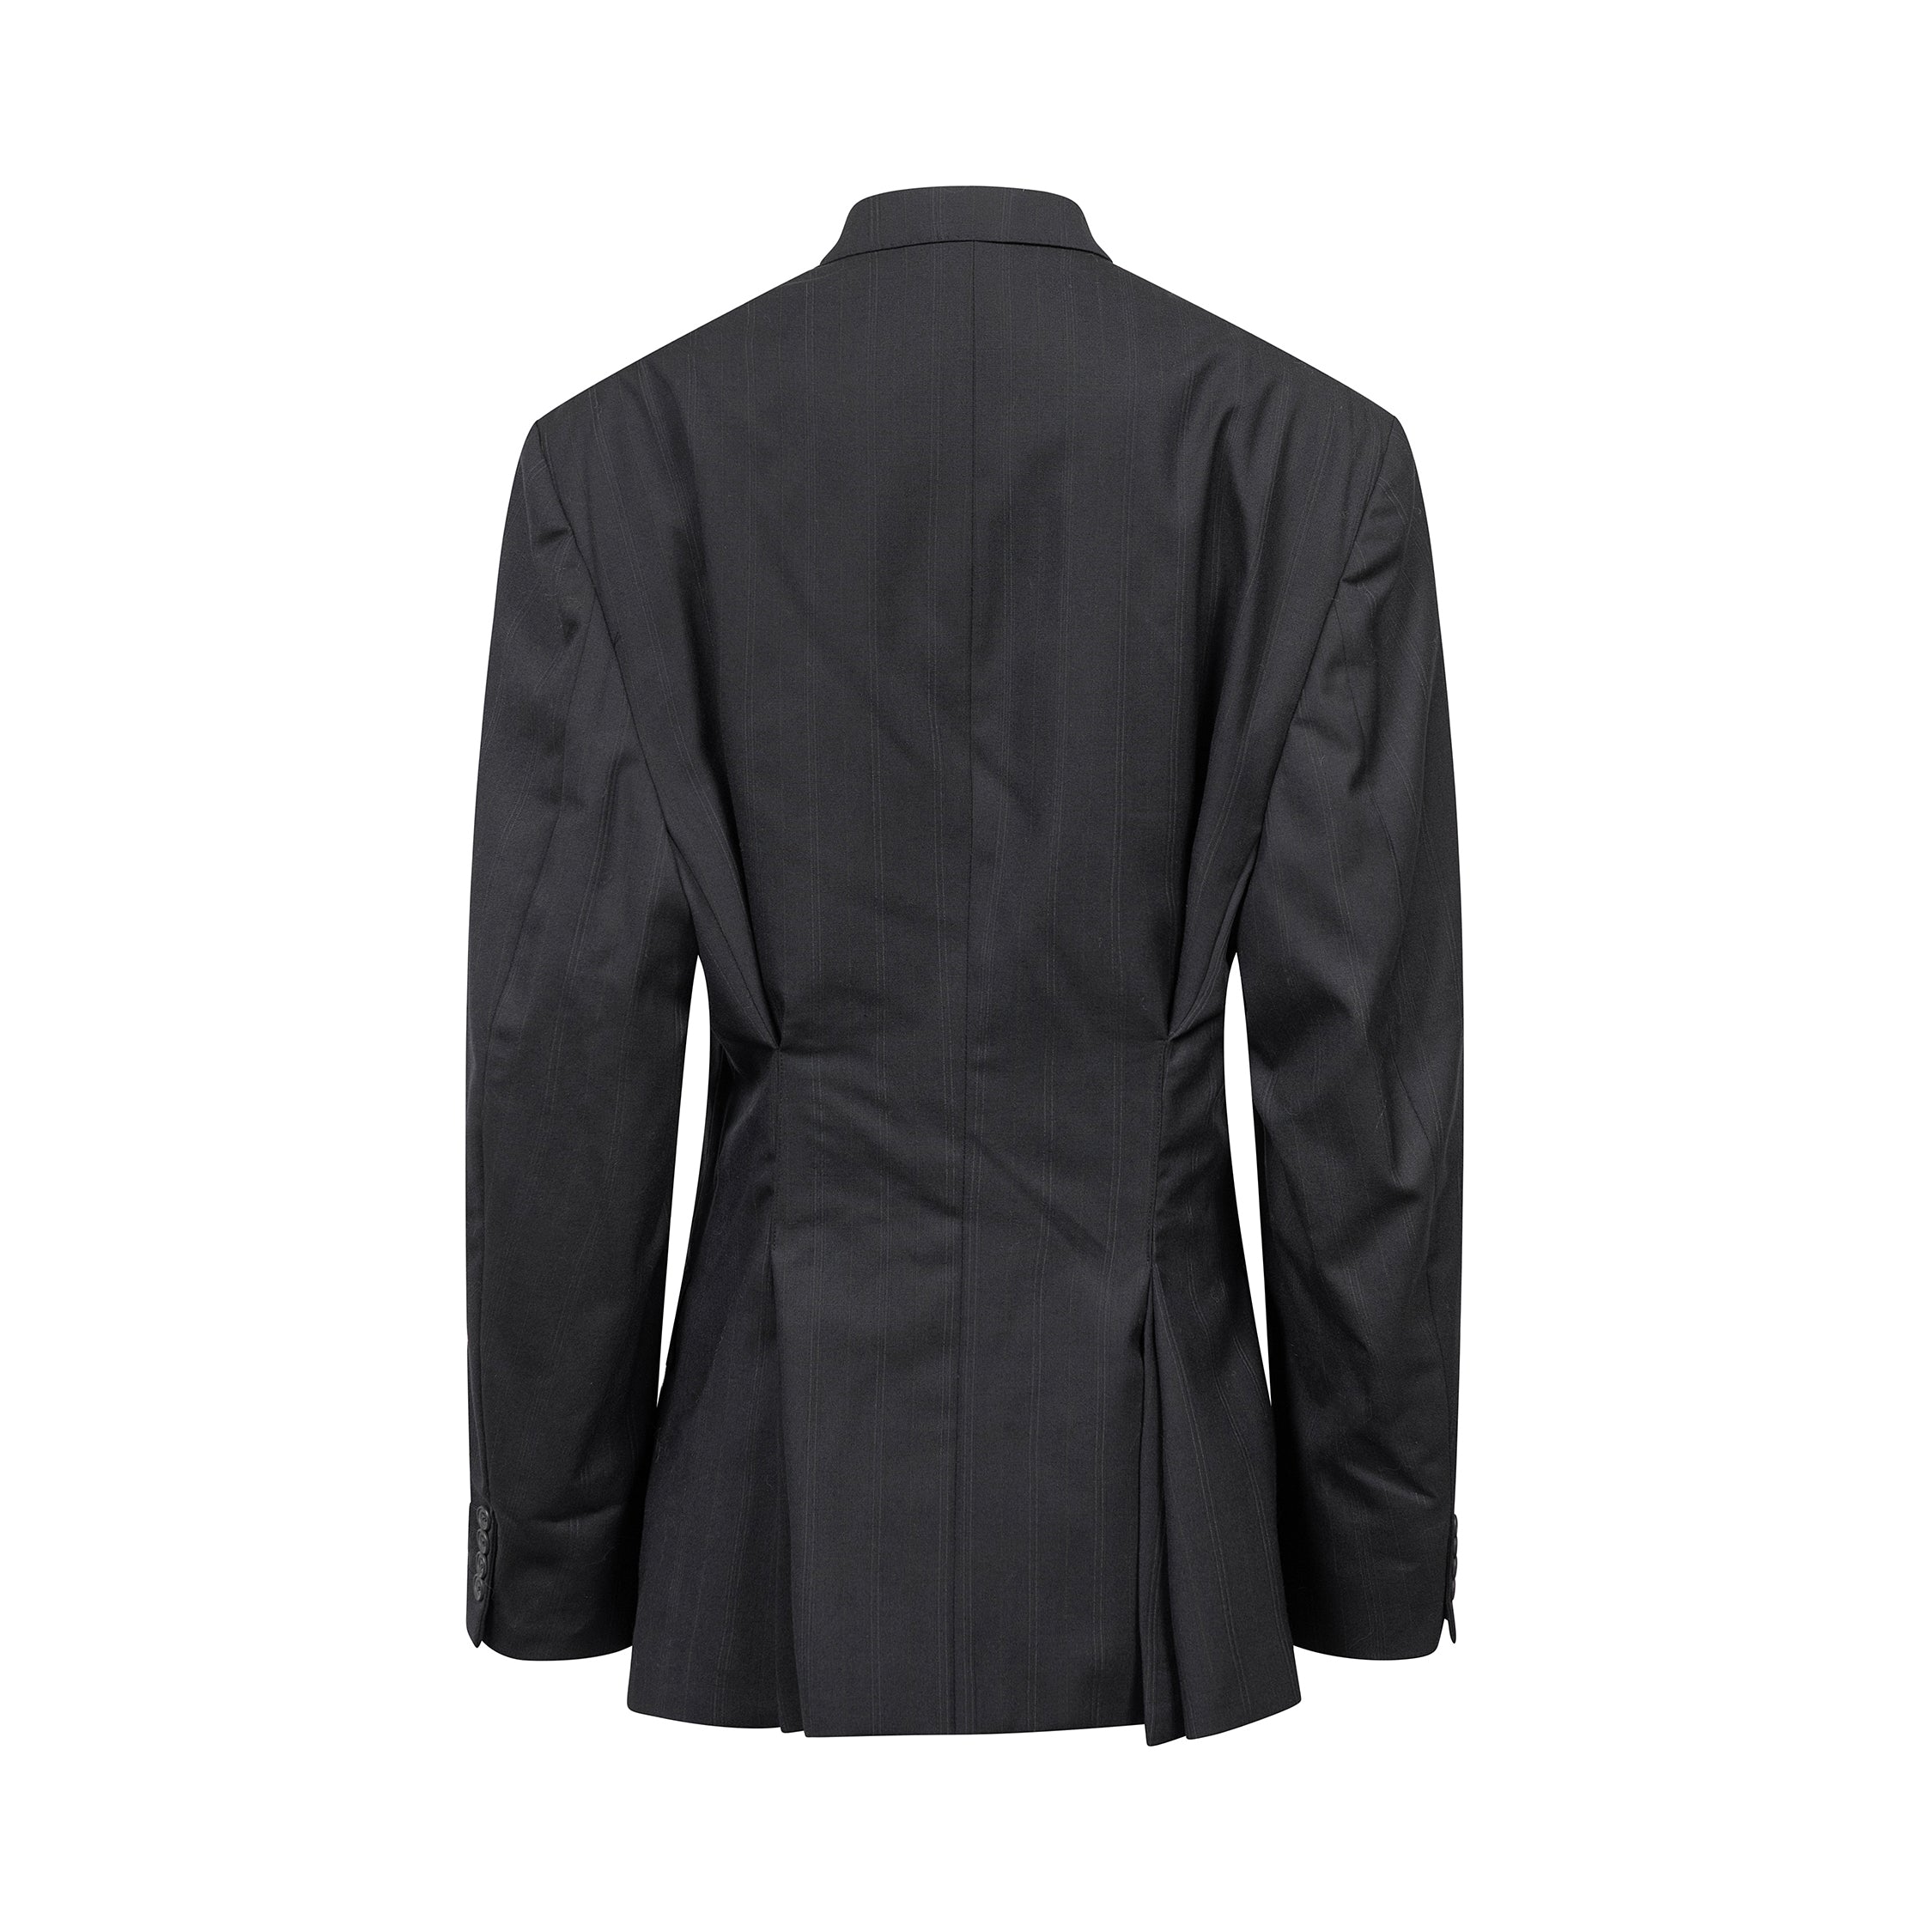 Fitted double breasted blazer by Christian Dior.